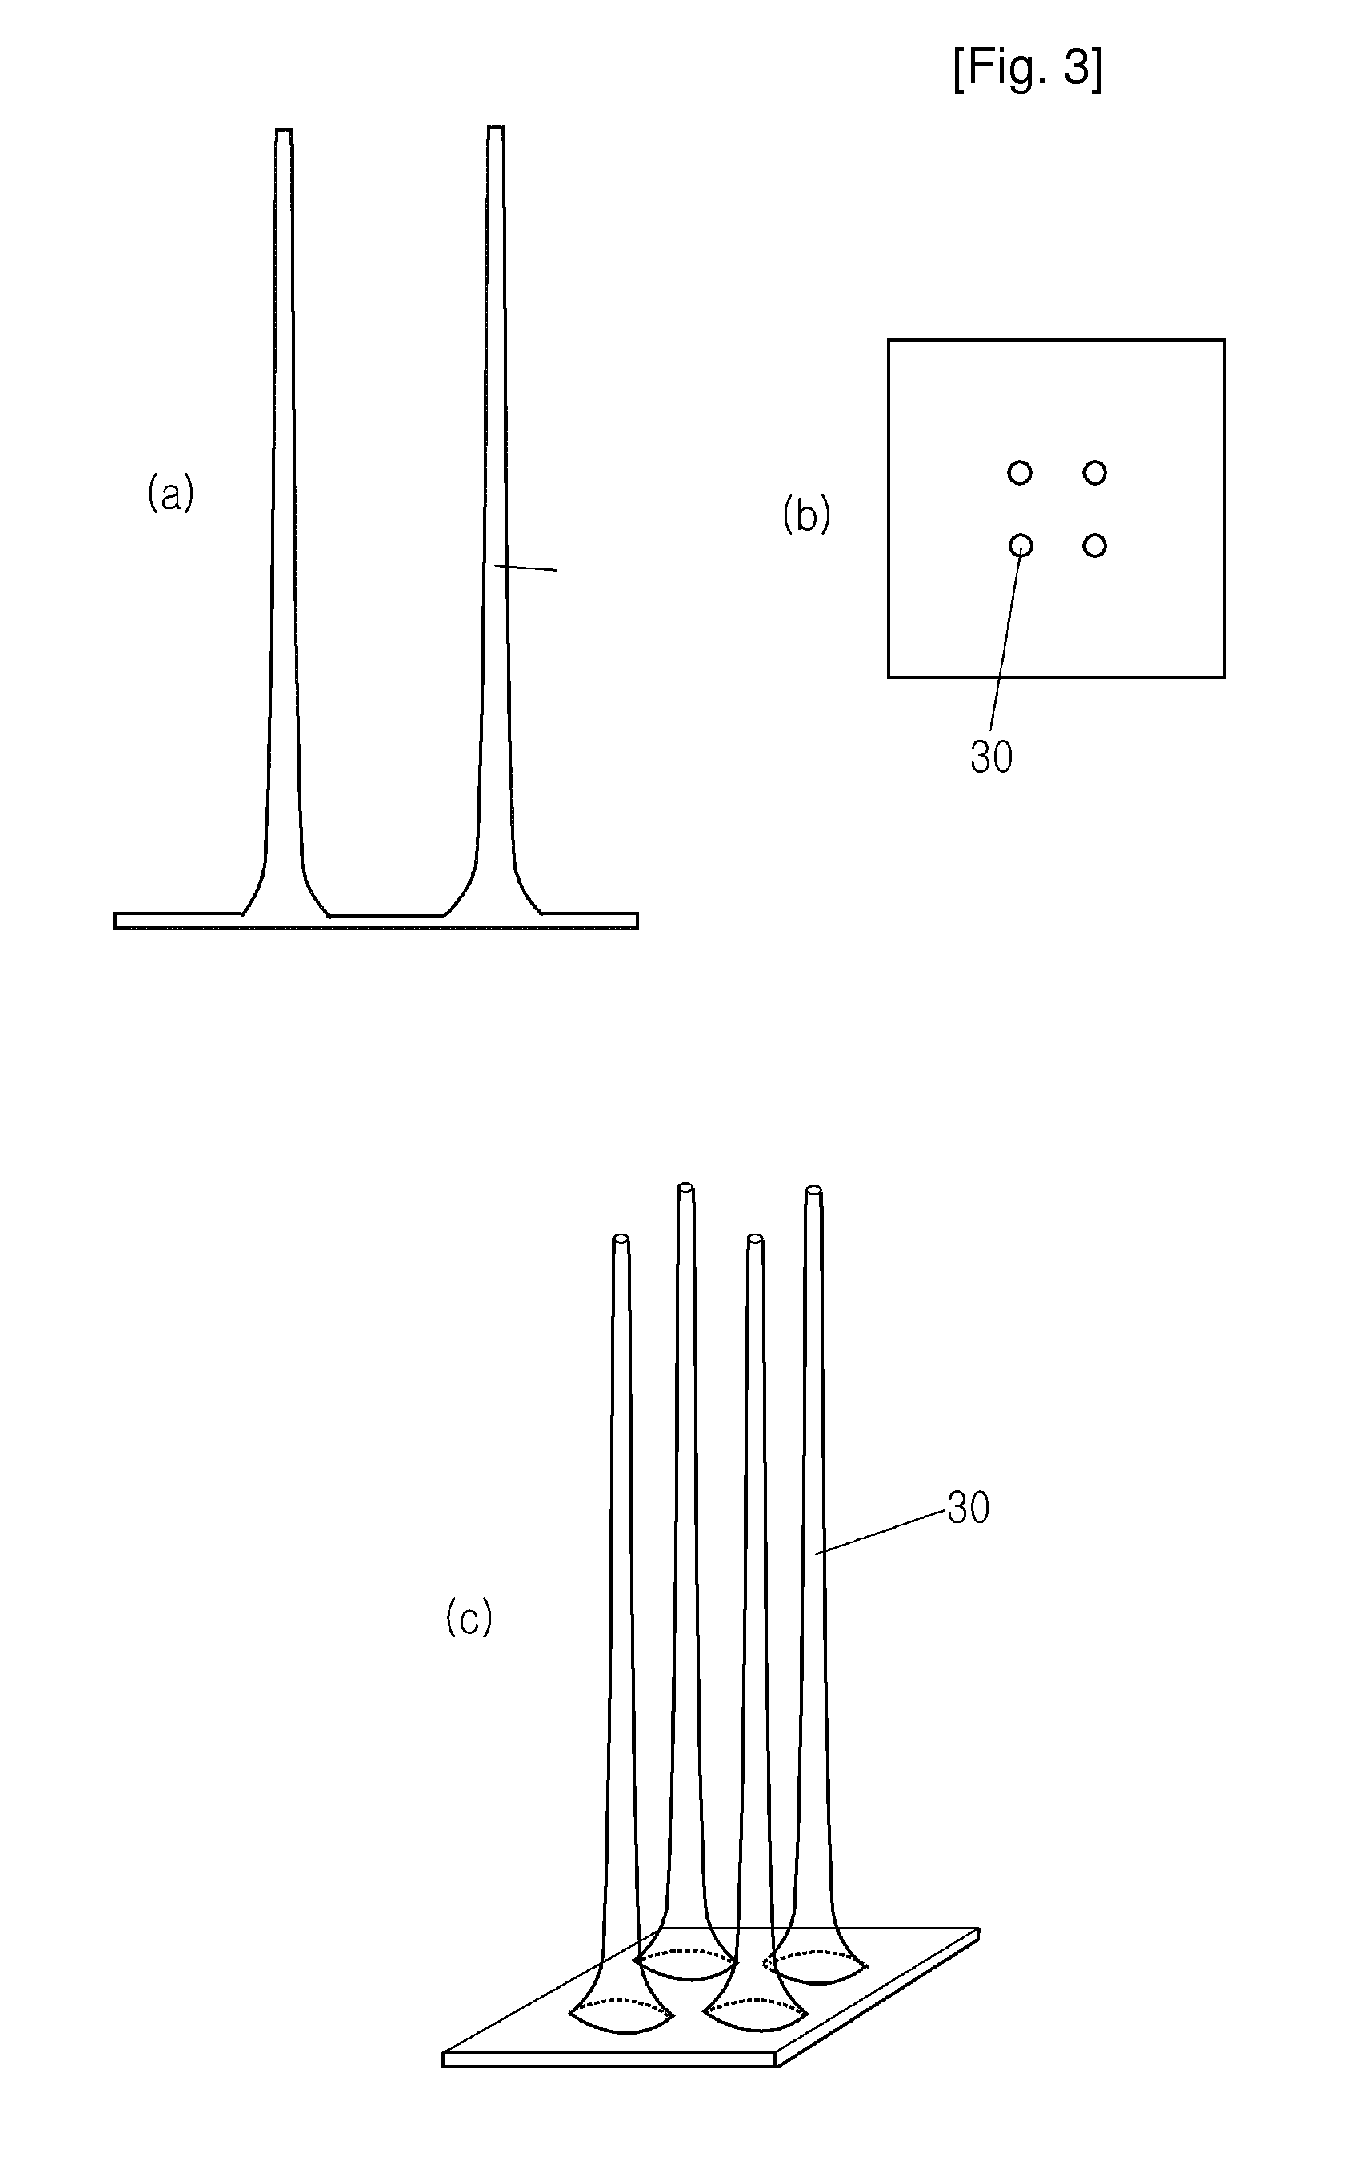 Method for preparing a hollow microneedle